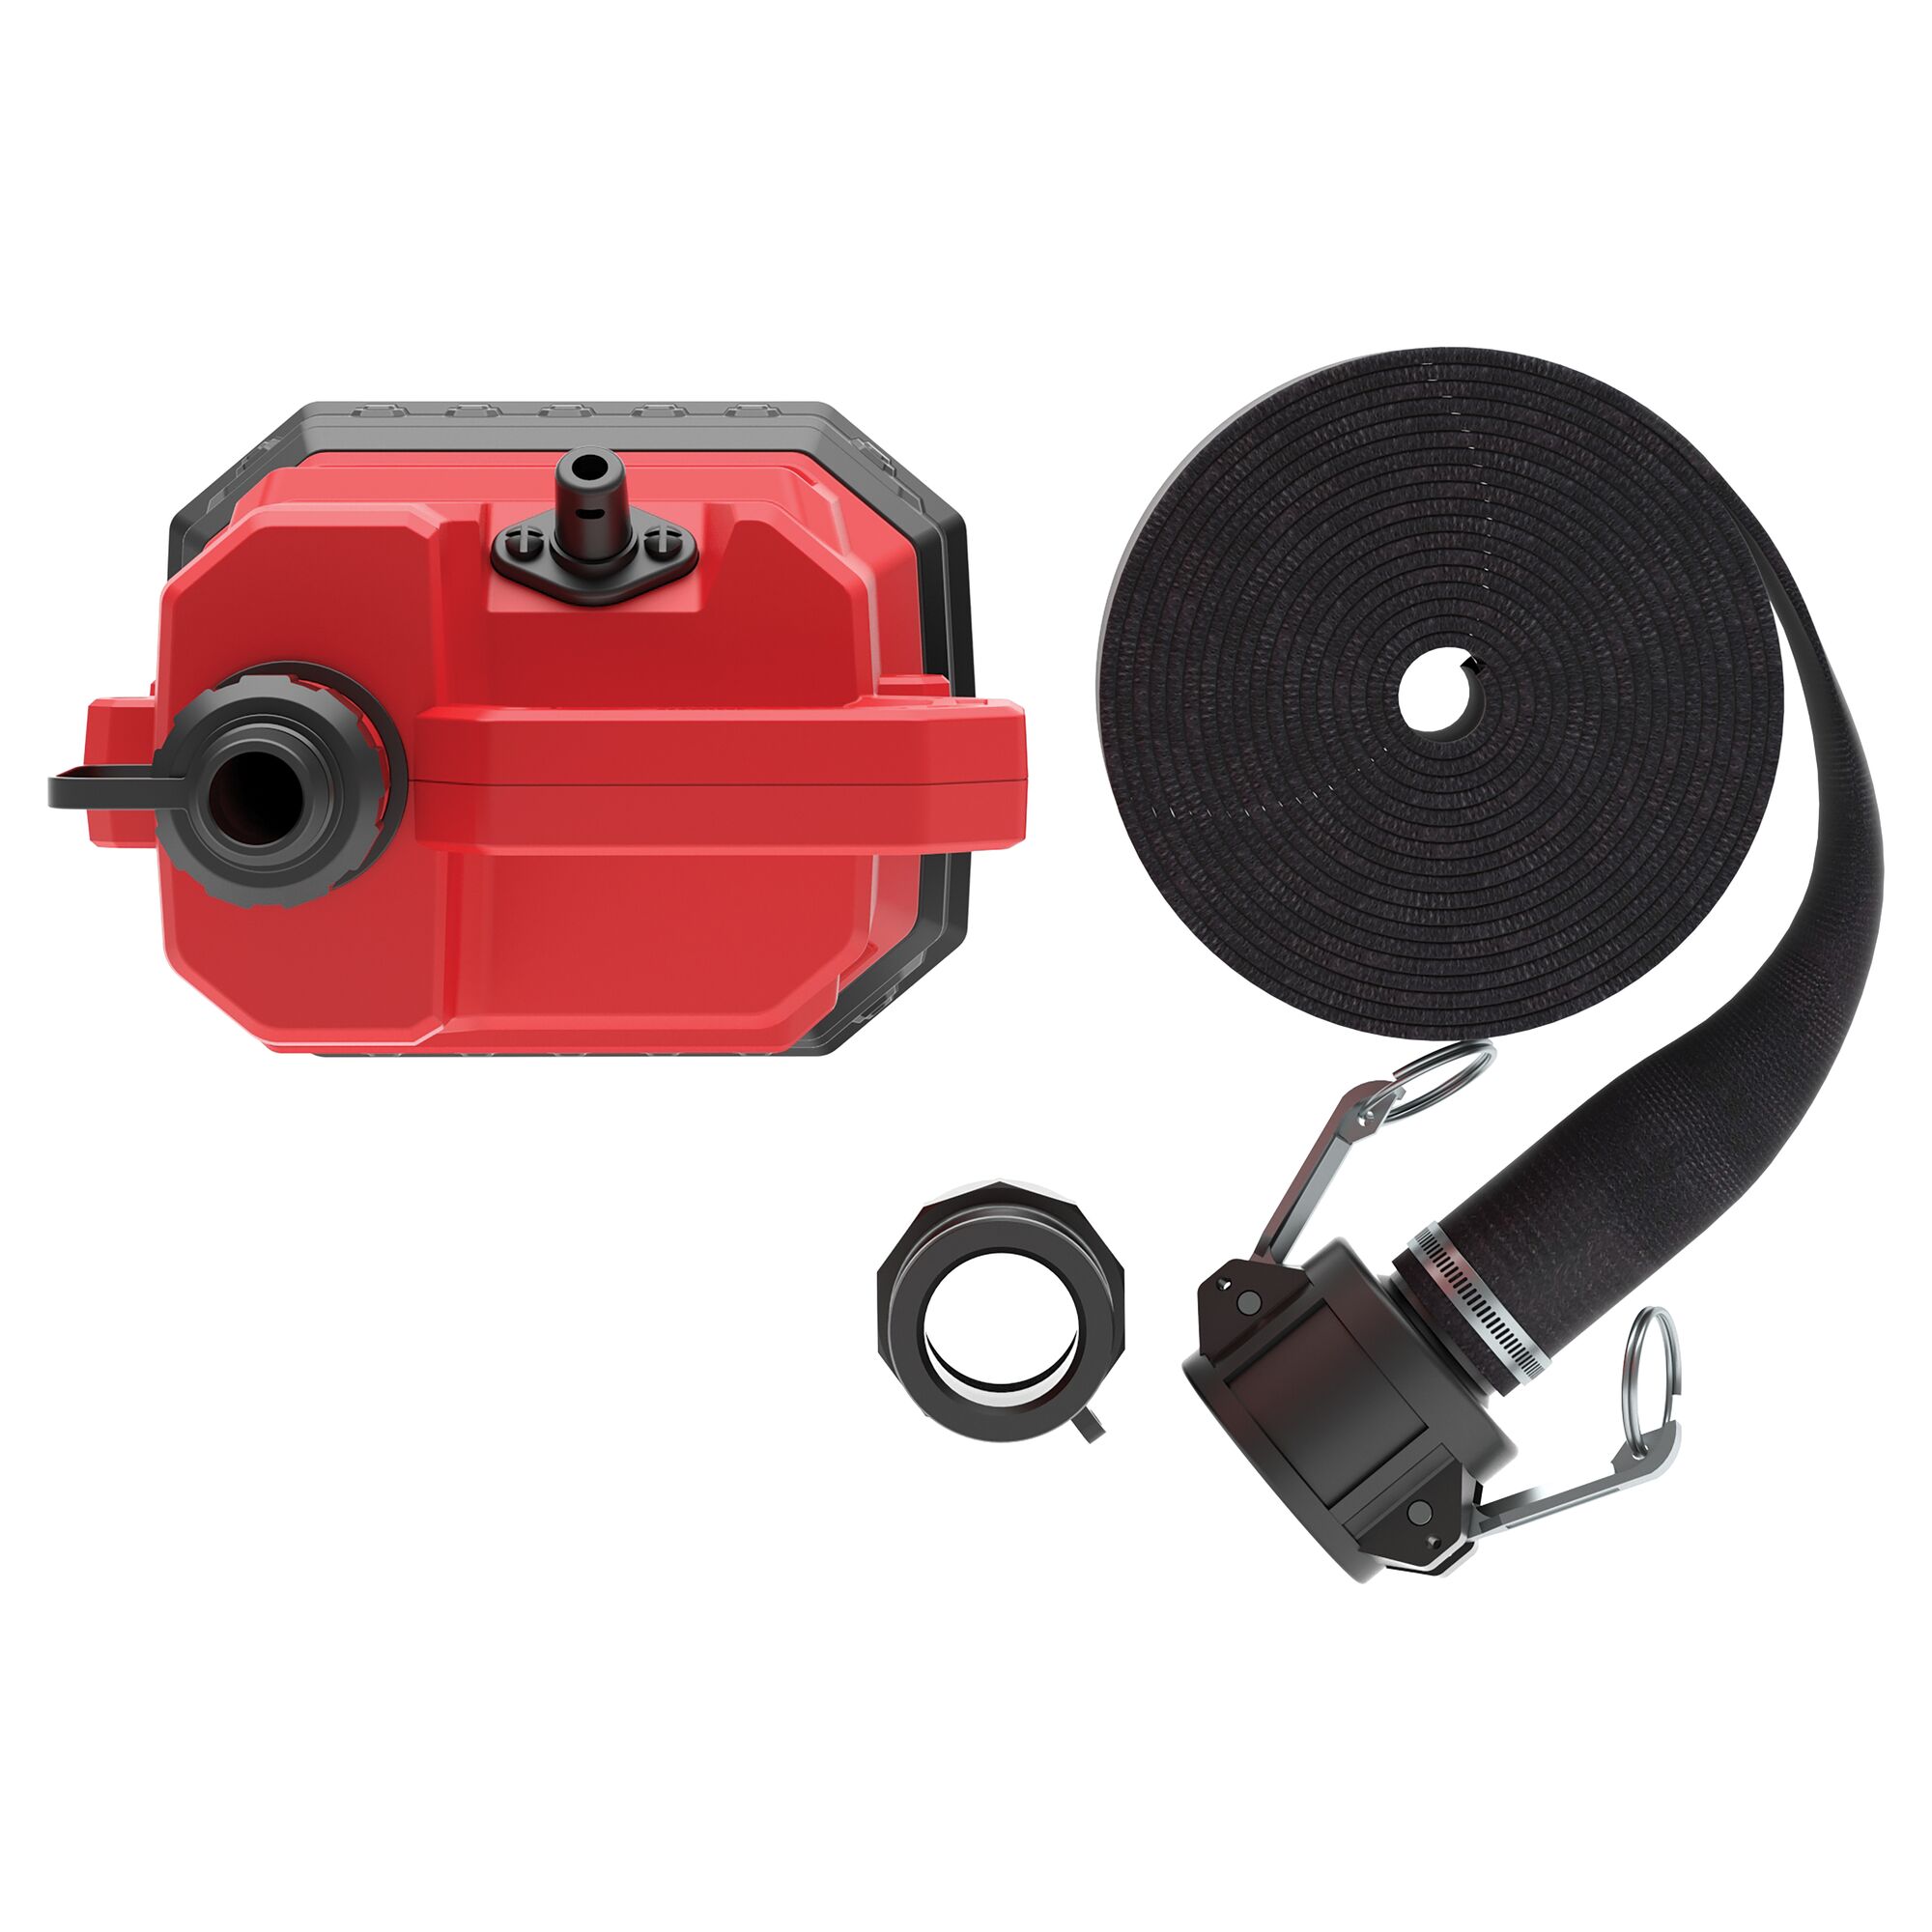 1-2HP WATER/UTILITY PUMP REINFORCED THERMOPLASTIC SUBMERSIBLE WITH PVC LAYFLAT HOSE KIT AND ADAPTERS TOP VIEW